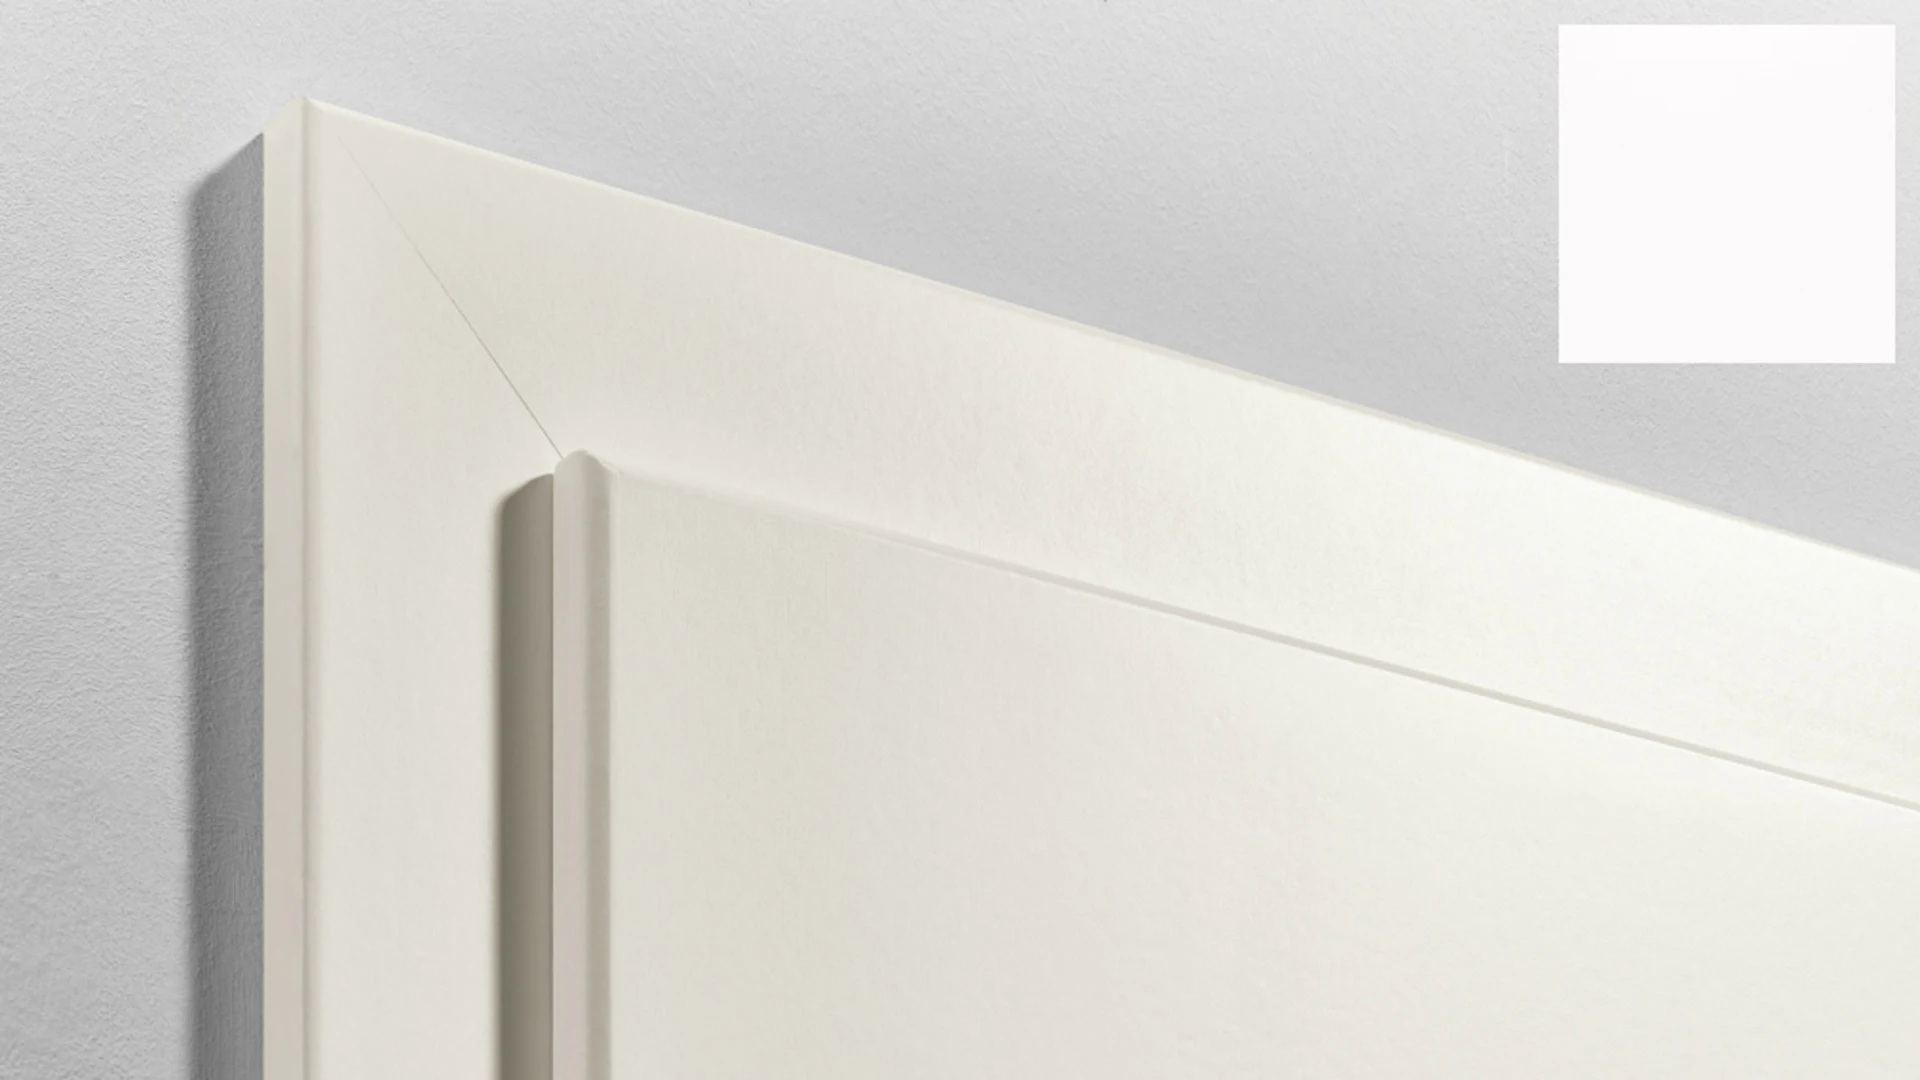 planeo standard frame round edge - white lacquer 9016 - 2110mm